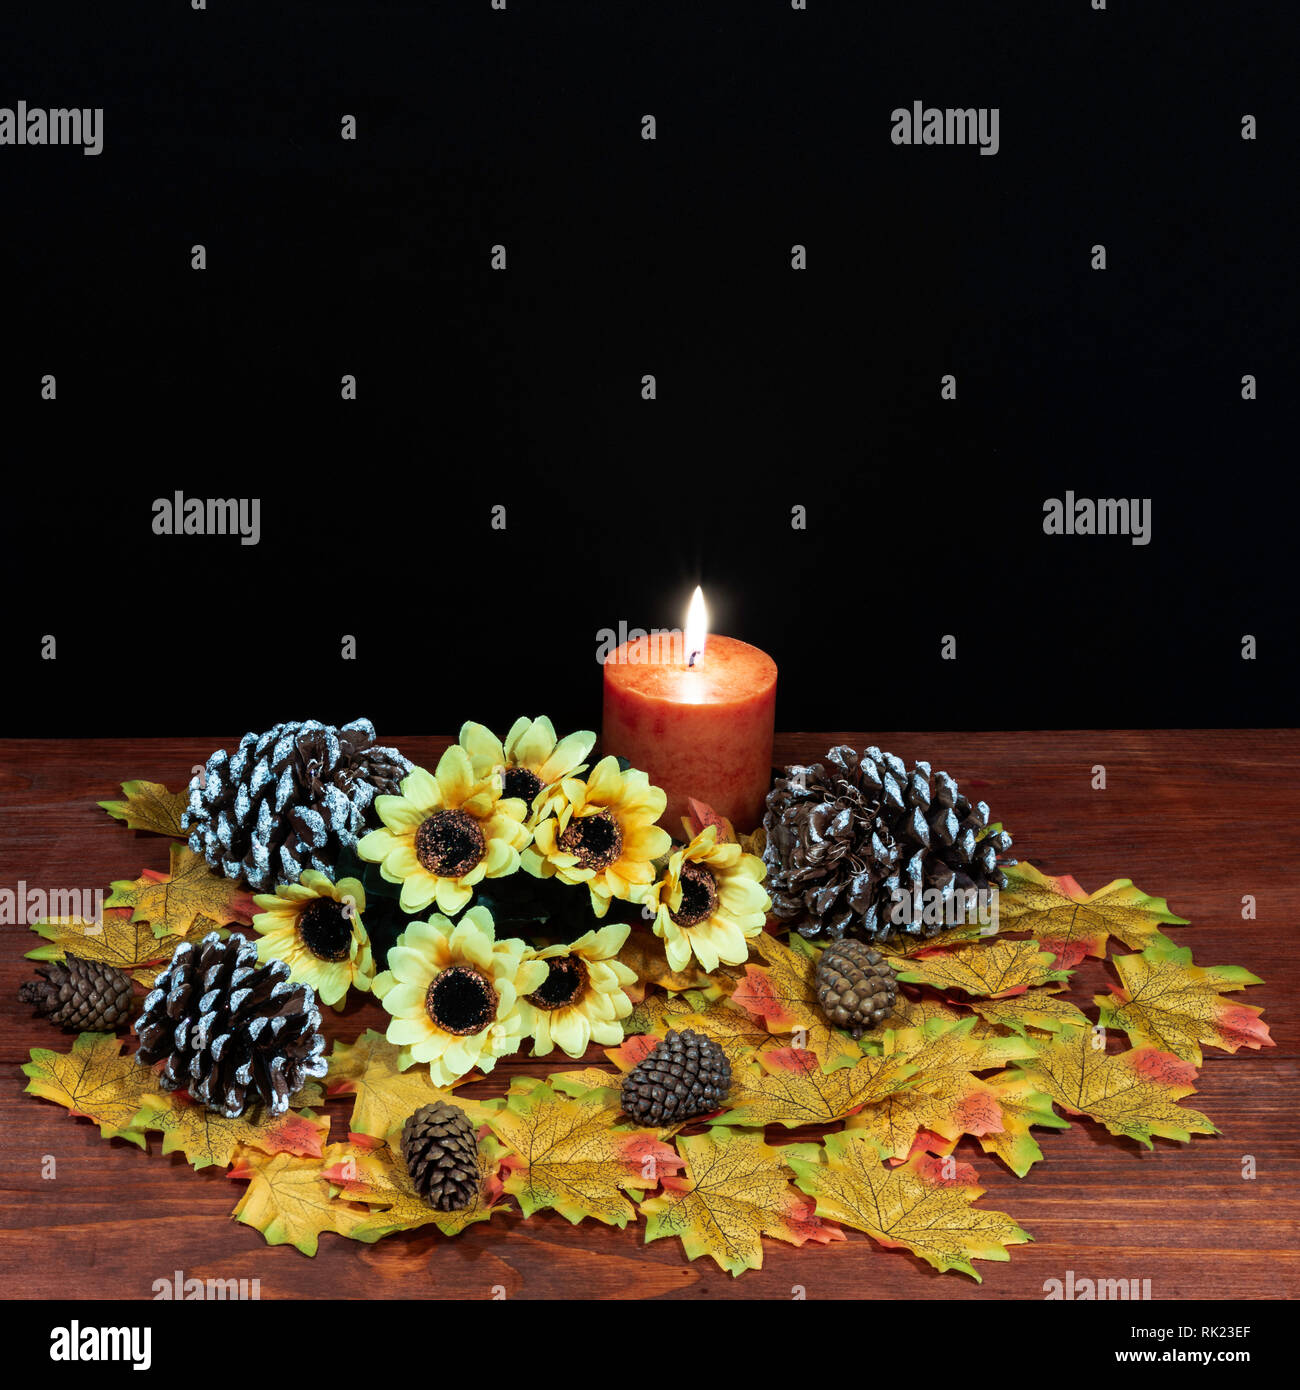 Silk maple leaves, beautiful bouquet of sunflowers, frosted pinecones and orange candle on tabletop with dark background. Stock Photo